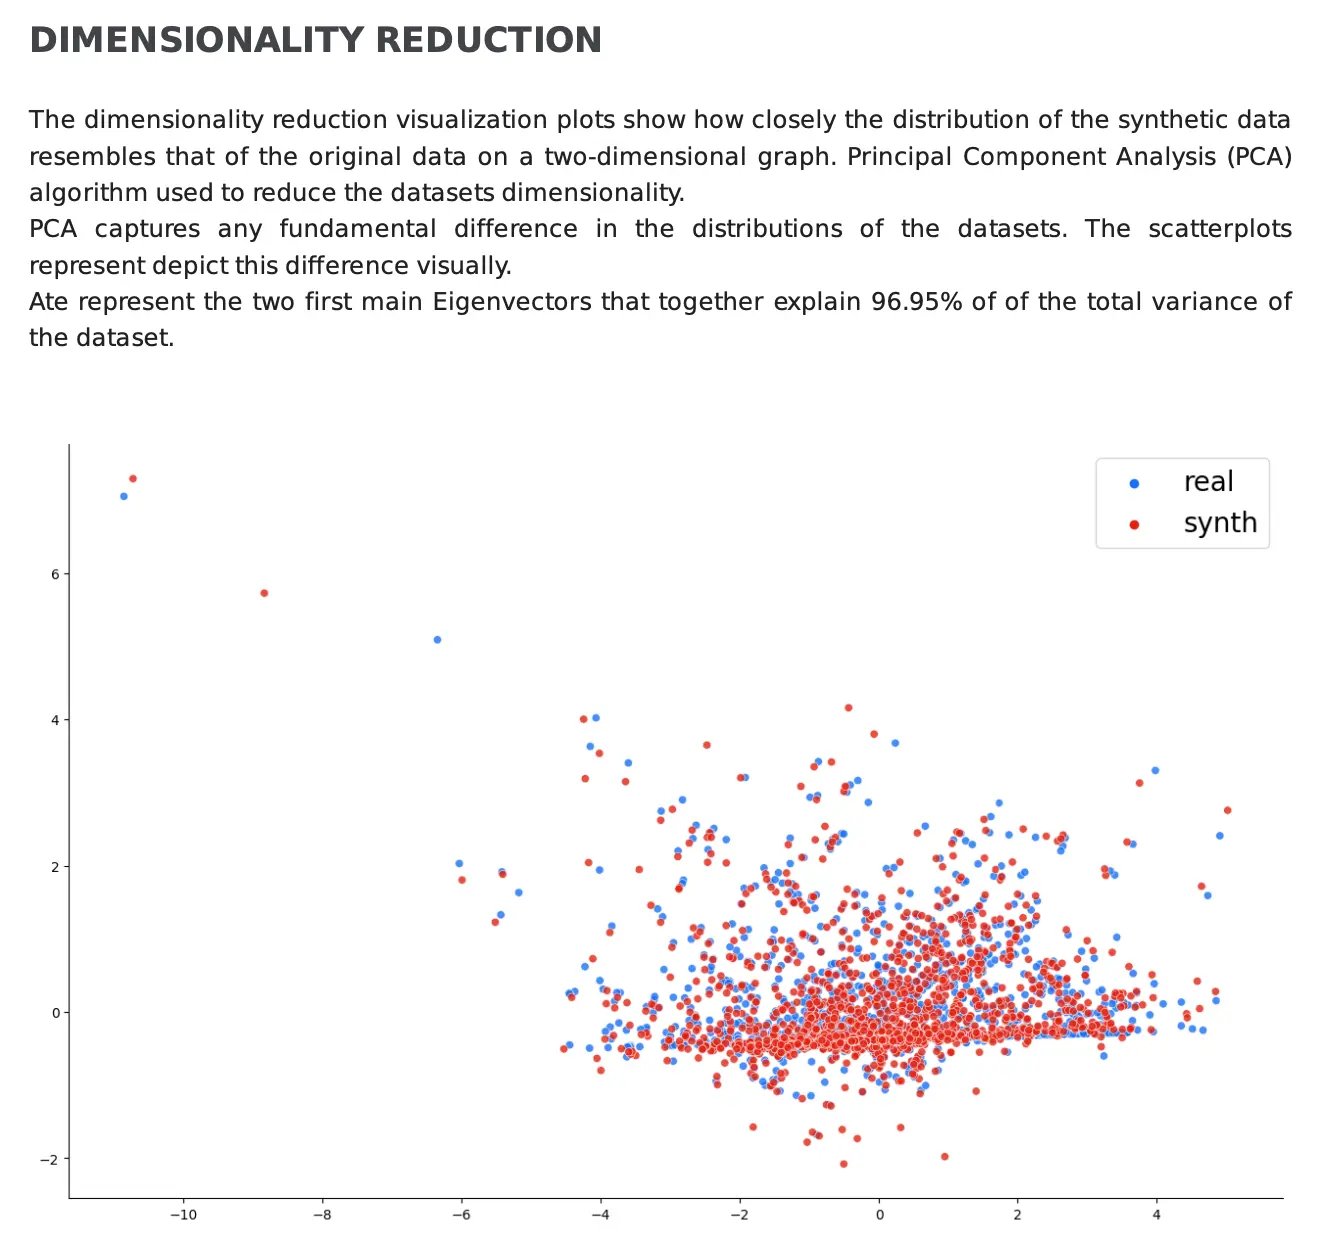 sdq_dimensionality_reduction